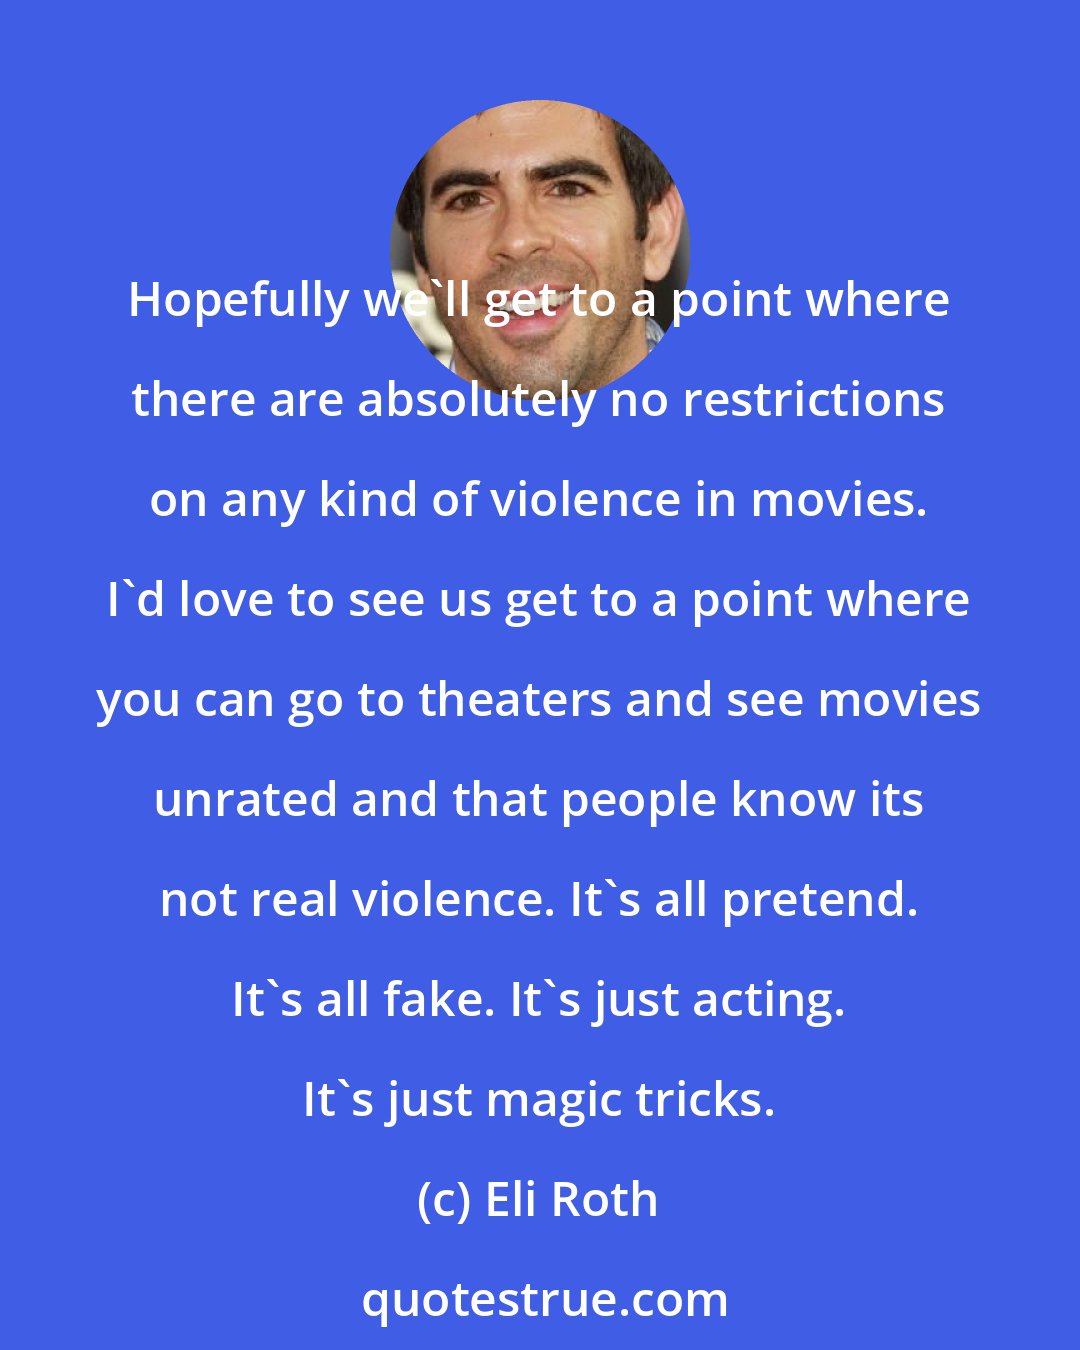 Eli Roth: Hopefully we'll get to a point where there are absolutely no restrictions on any kind of violence in movies. I'd love to see us get to a point where you can go to theaters and see movies unrated and that people know its not real violence. It's all pretend. It's all fake. It's just acting. It's just magic tricks.